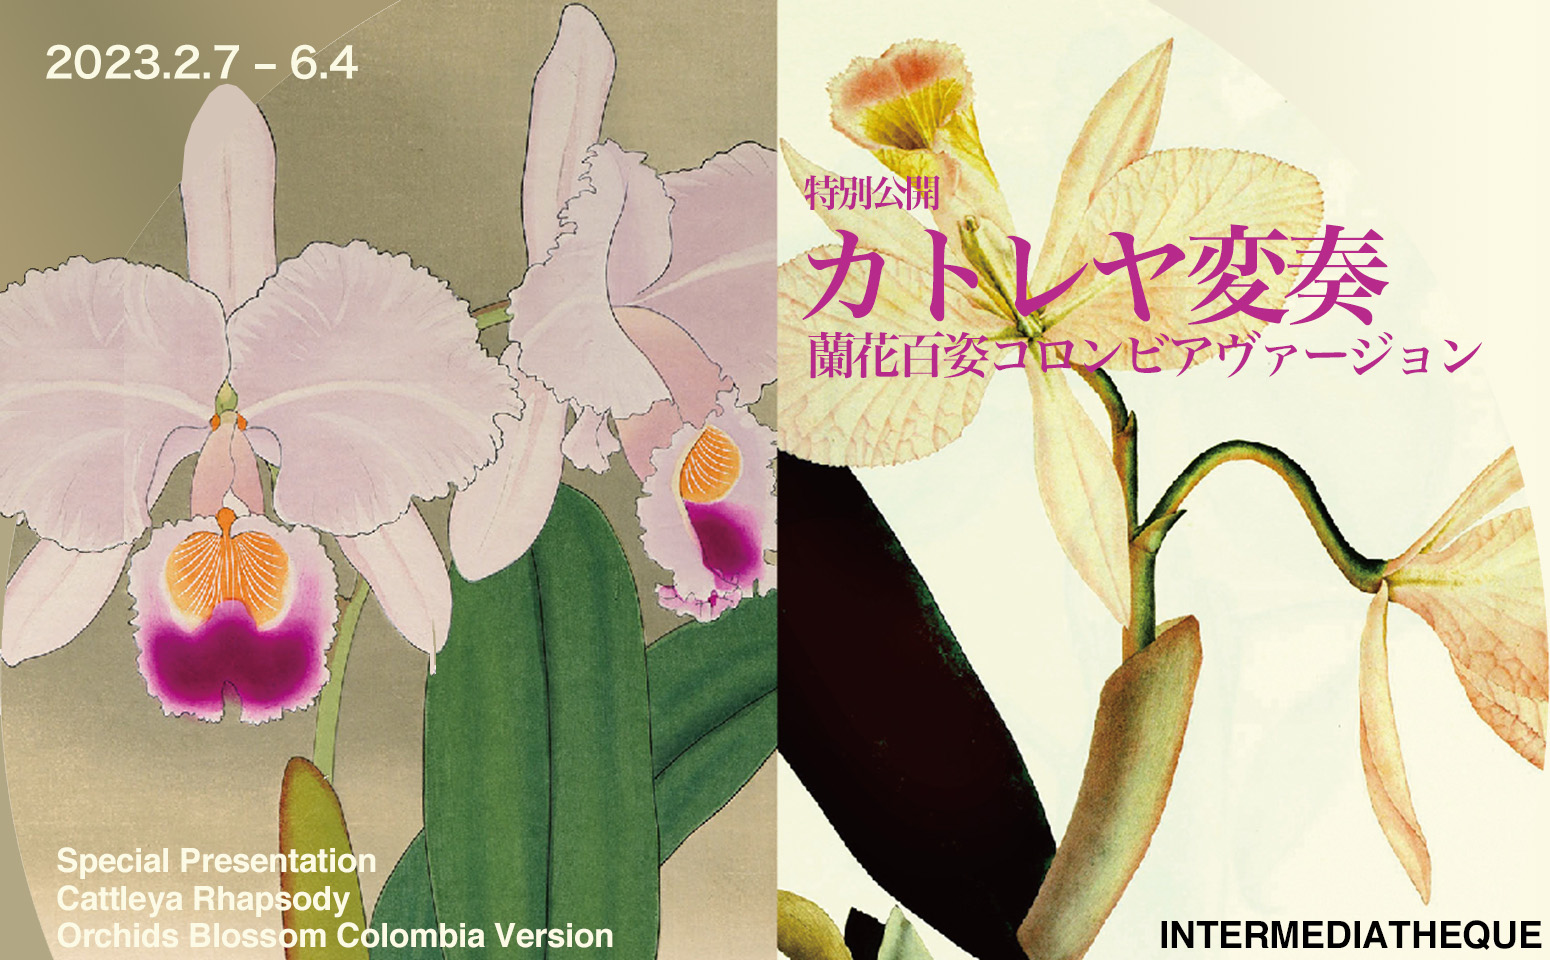 Special Presentation “Cattleya Rhapsody – Orchids Blossom Colombia Version”